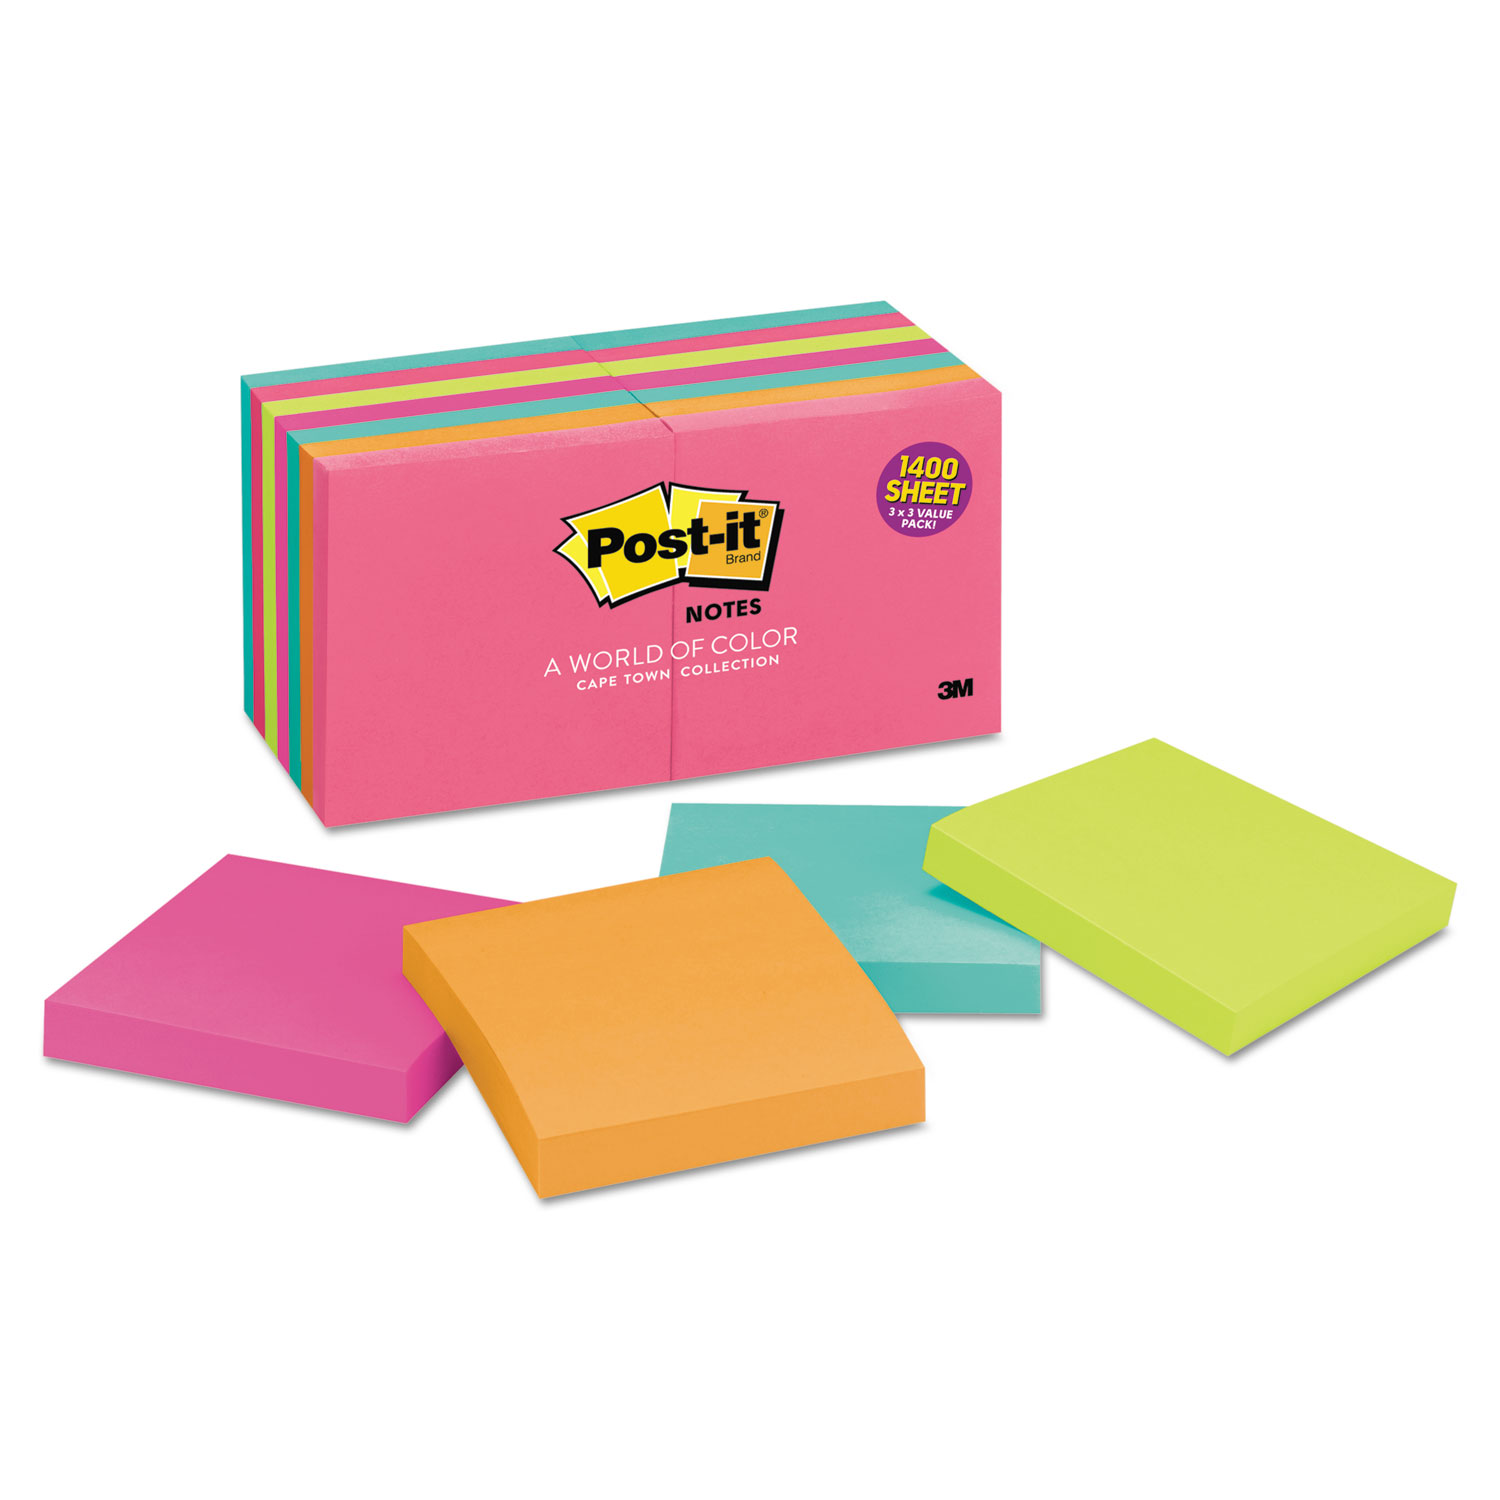  Post-it Notes 654-14AN Original Pads in Cape Town Colors, 3 x 3, 100-Sheet, 14/Pack (MMM65414AN) 